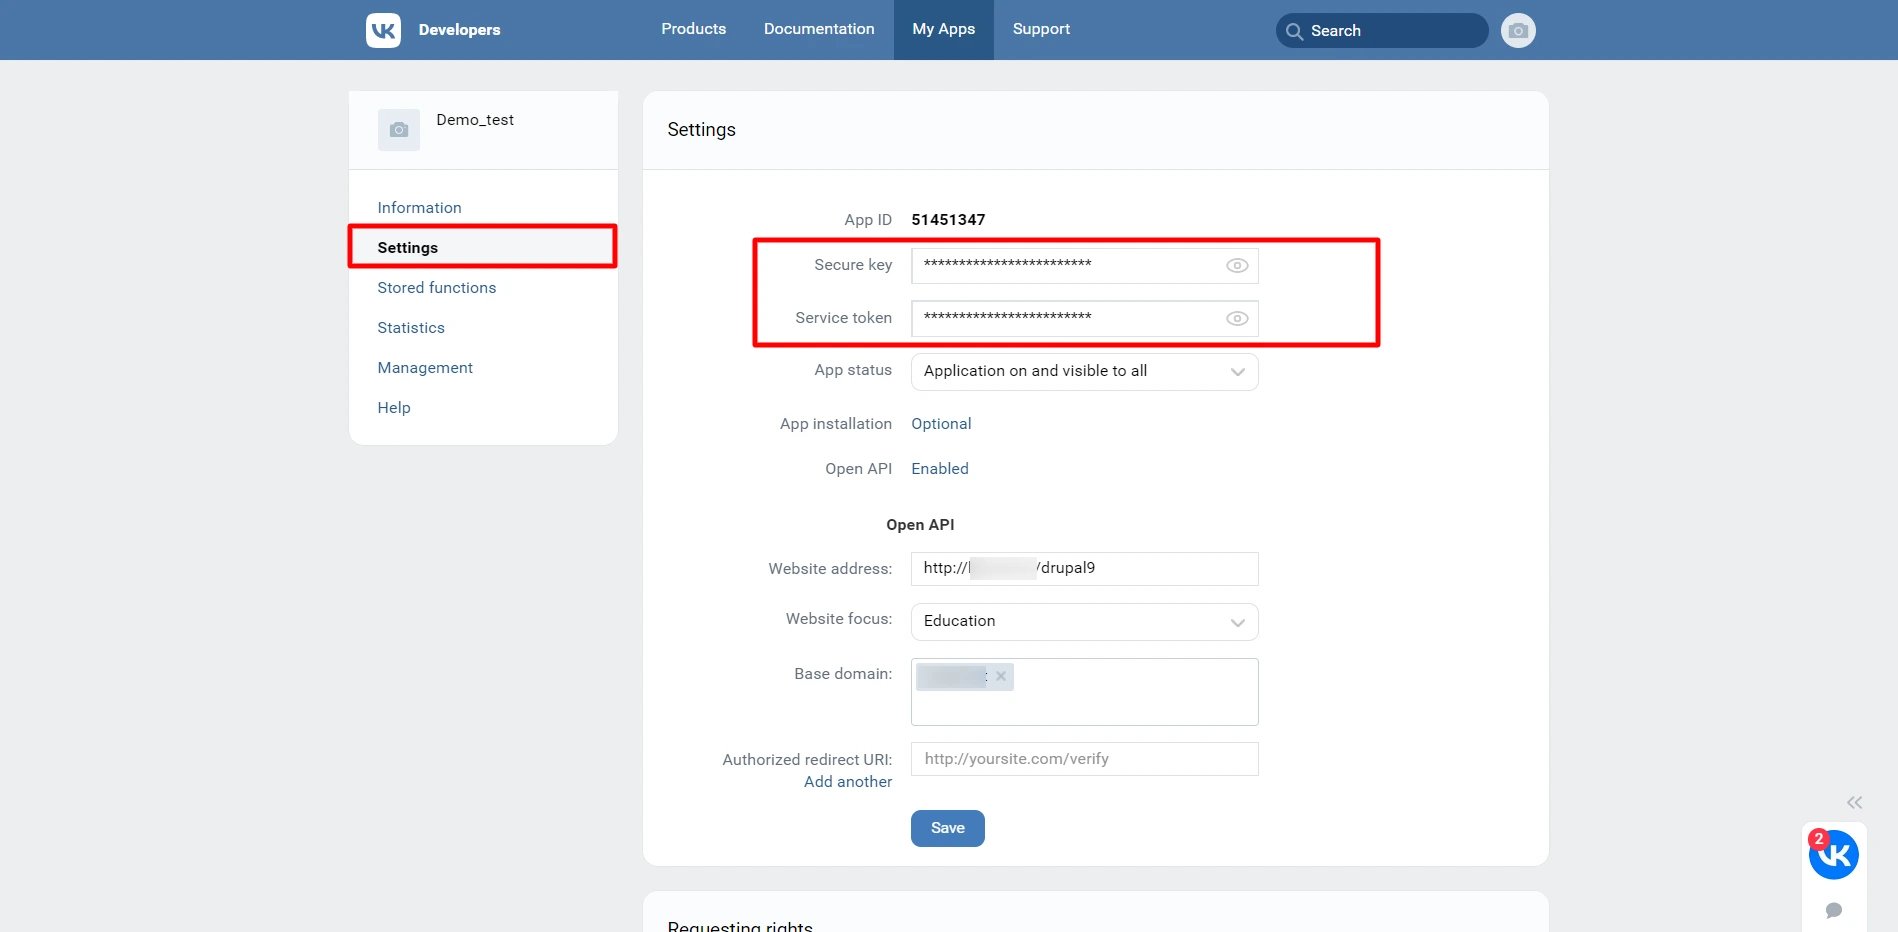 Vkontakte sso integration - To get secyre key and secure token and enter authorized redirect url